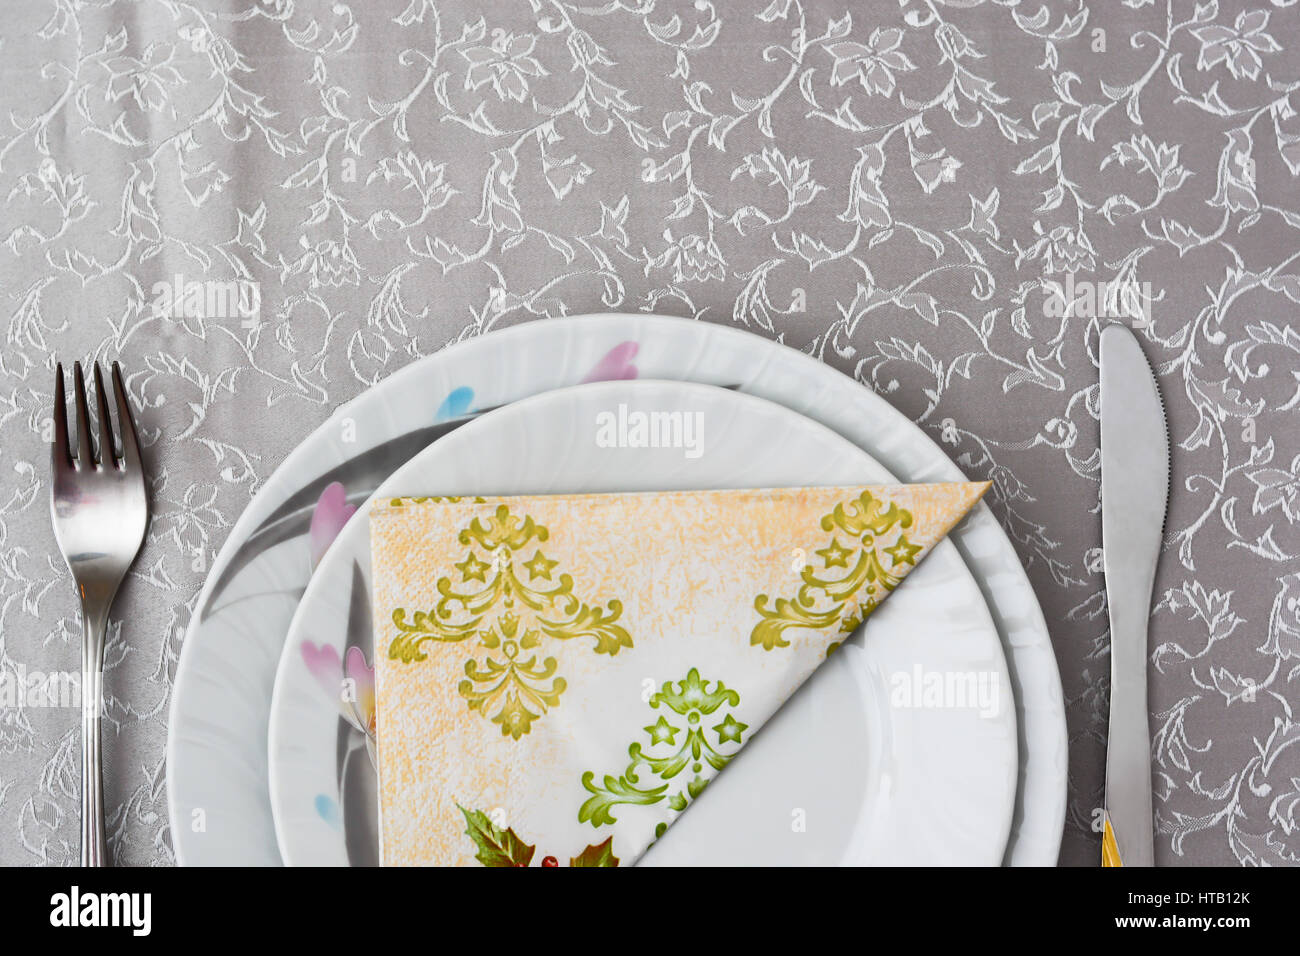 cutlery and plates with napkin on the table arranged for Saint day Stock Photo